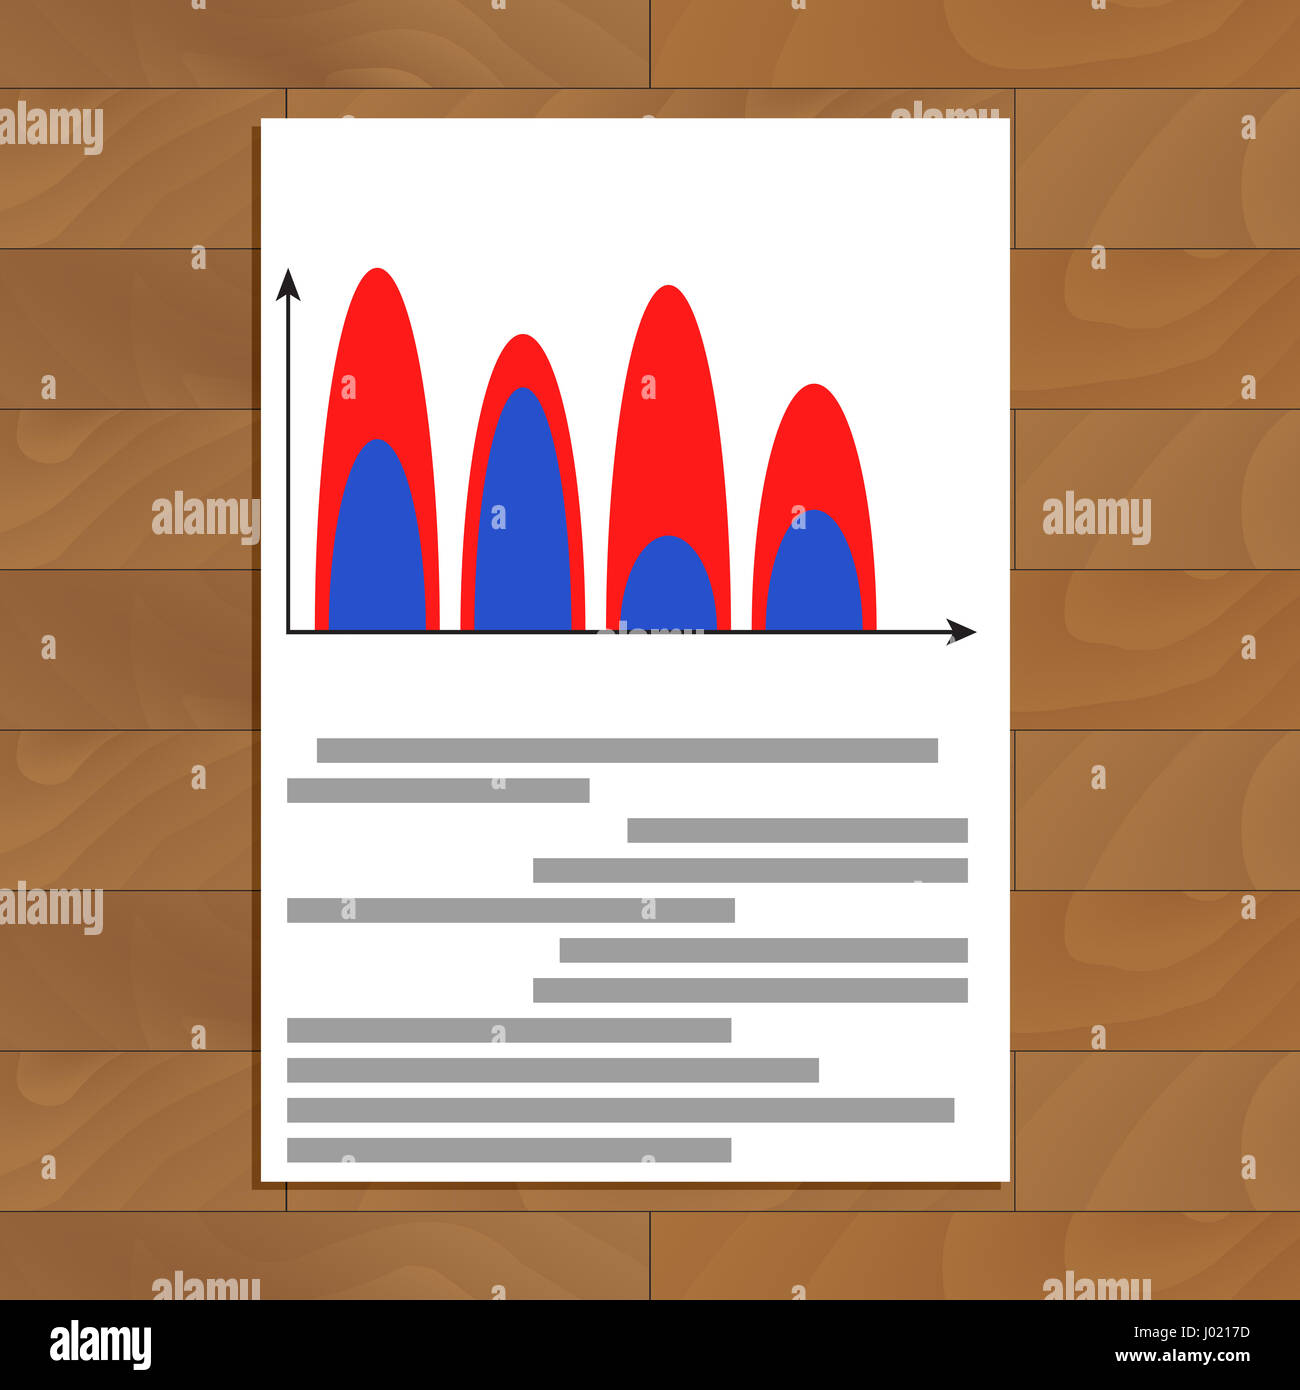 Document with wave color chart. Statistic infographic economic, vector illustration Stock Photo